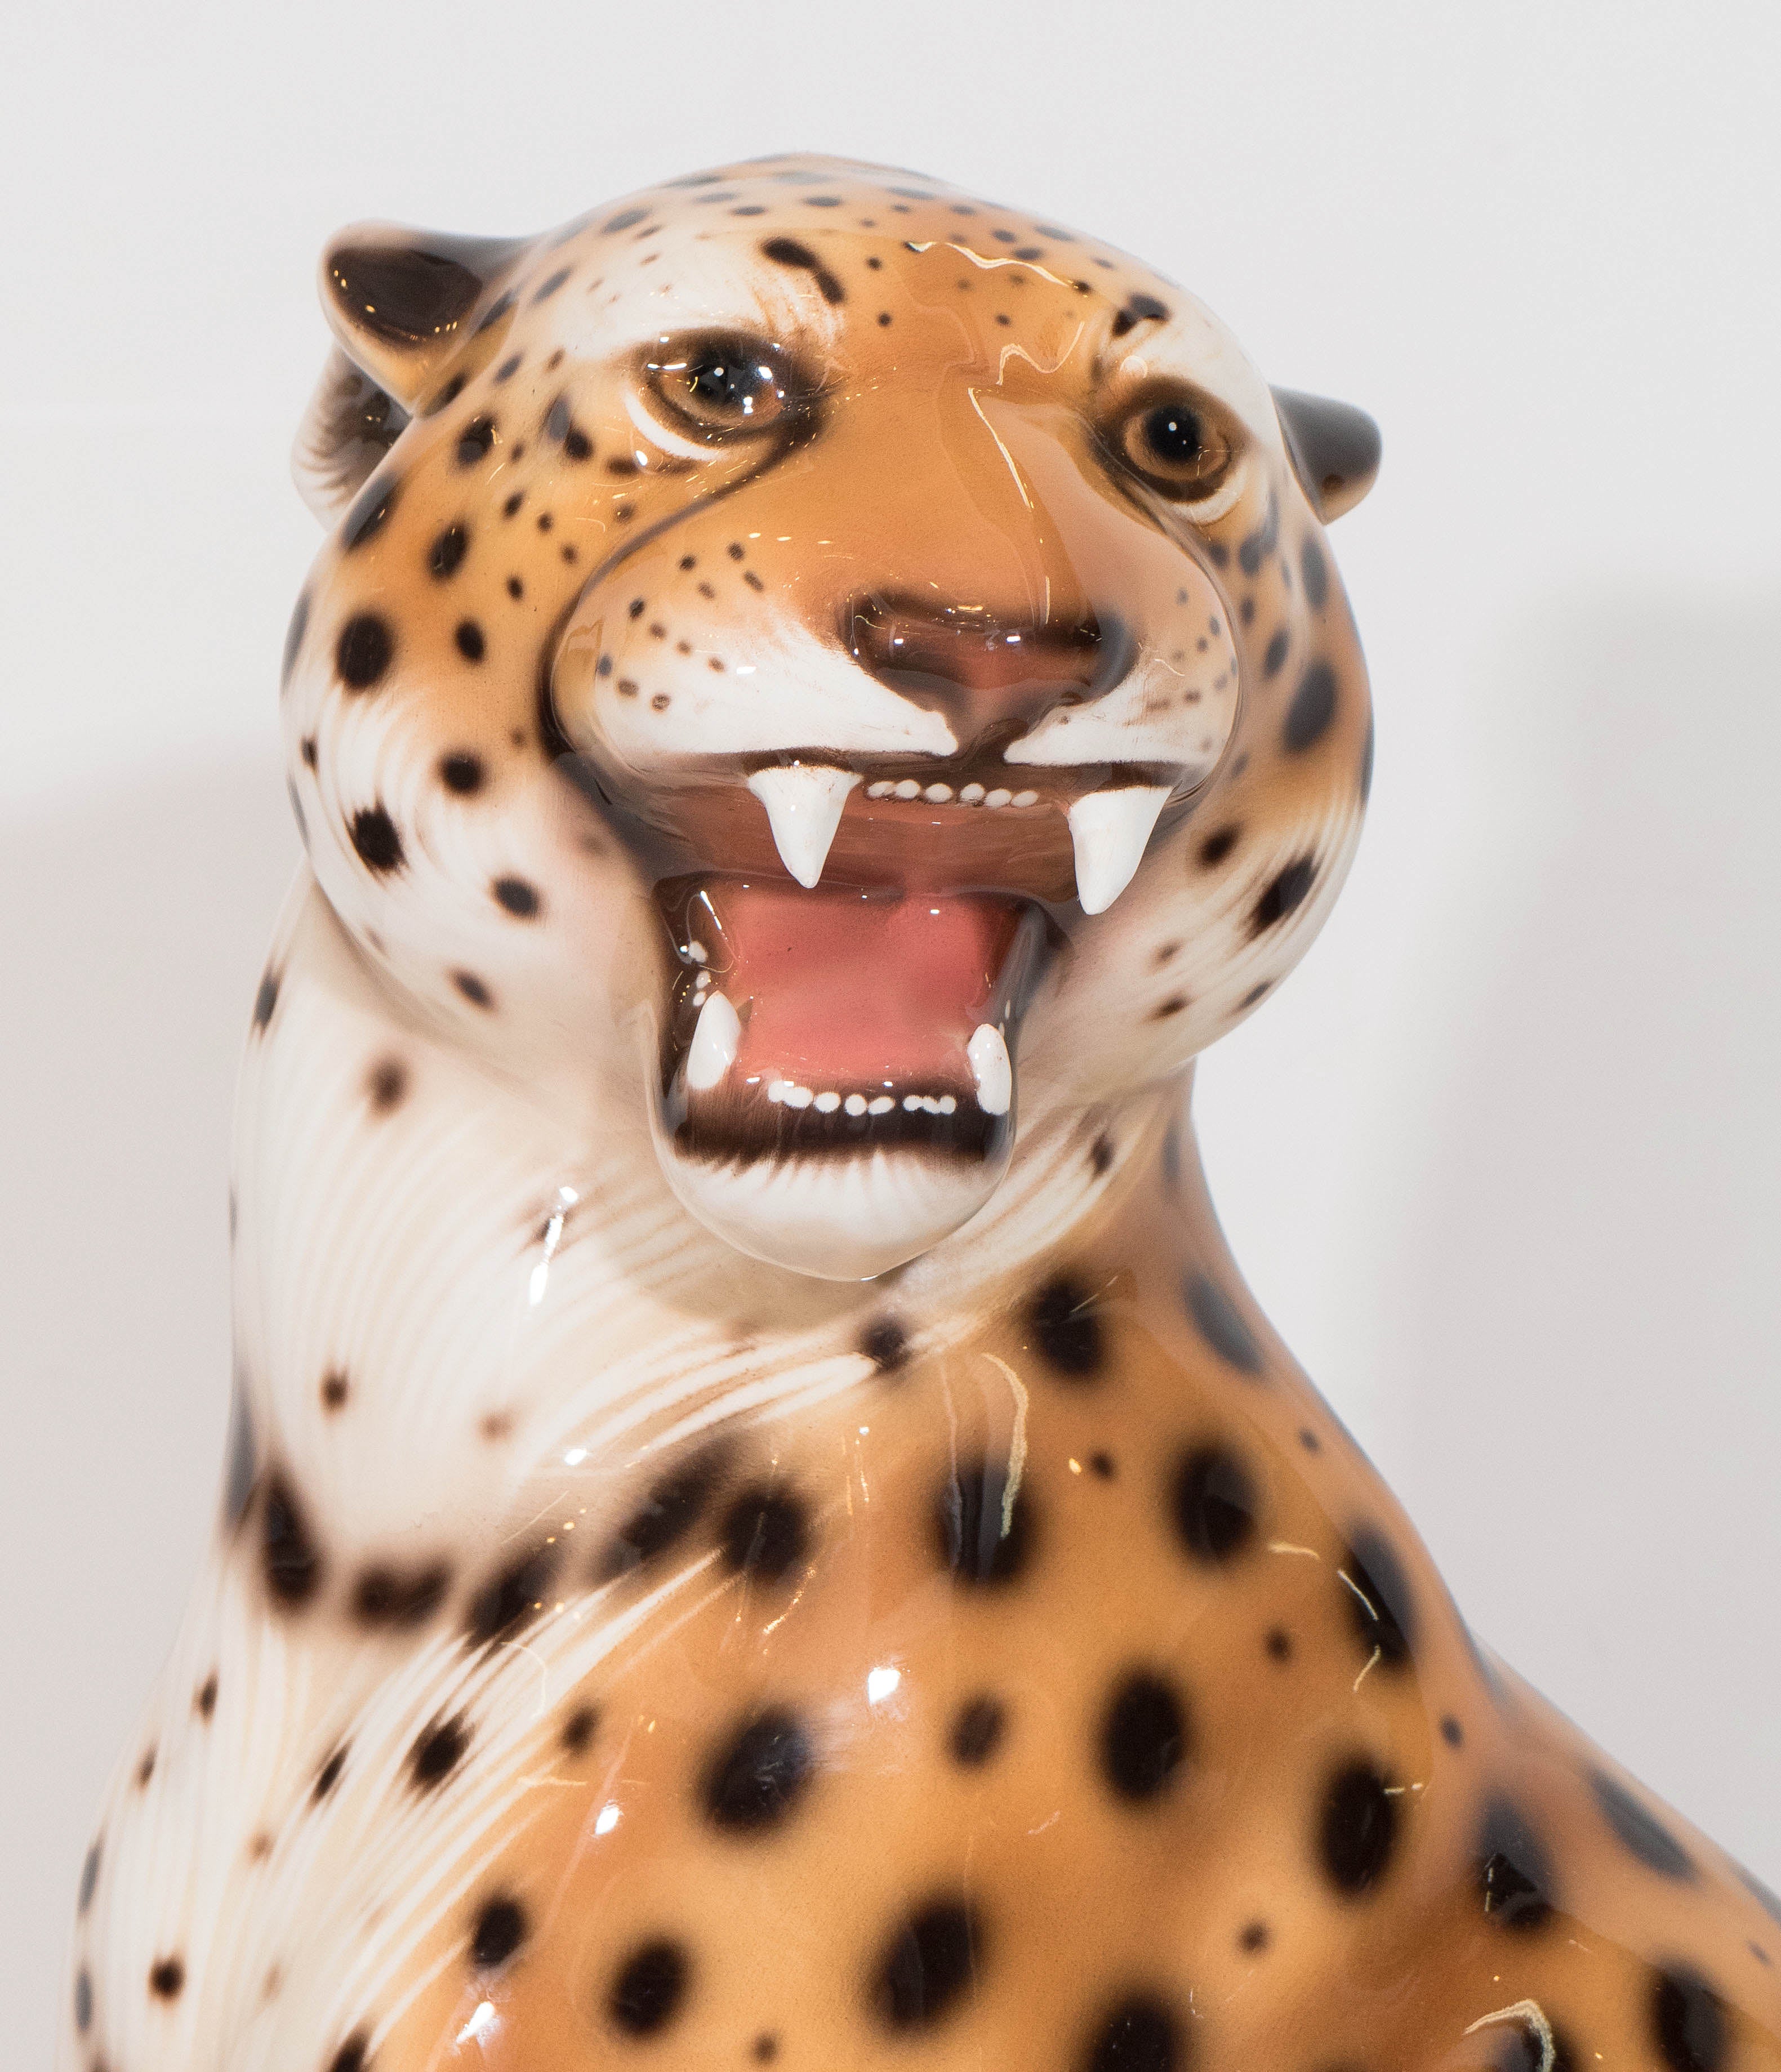 An Italian vintage sculptural leopard, produced circa 1960s, in glazed ceramic, depicted sitting upright, roaring ferociously. Markings include stamp [Made in Italy] on the base. Good vintage condition, with minor age appropriate wear to the base.